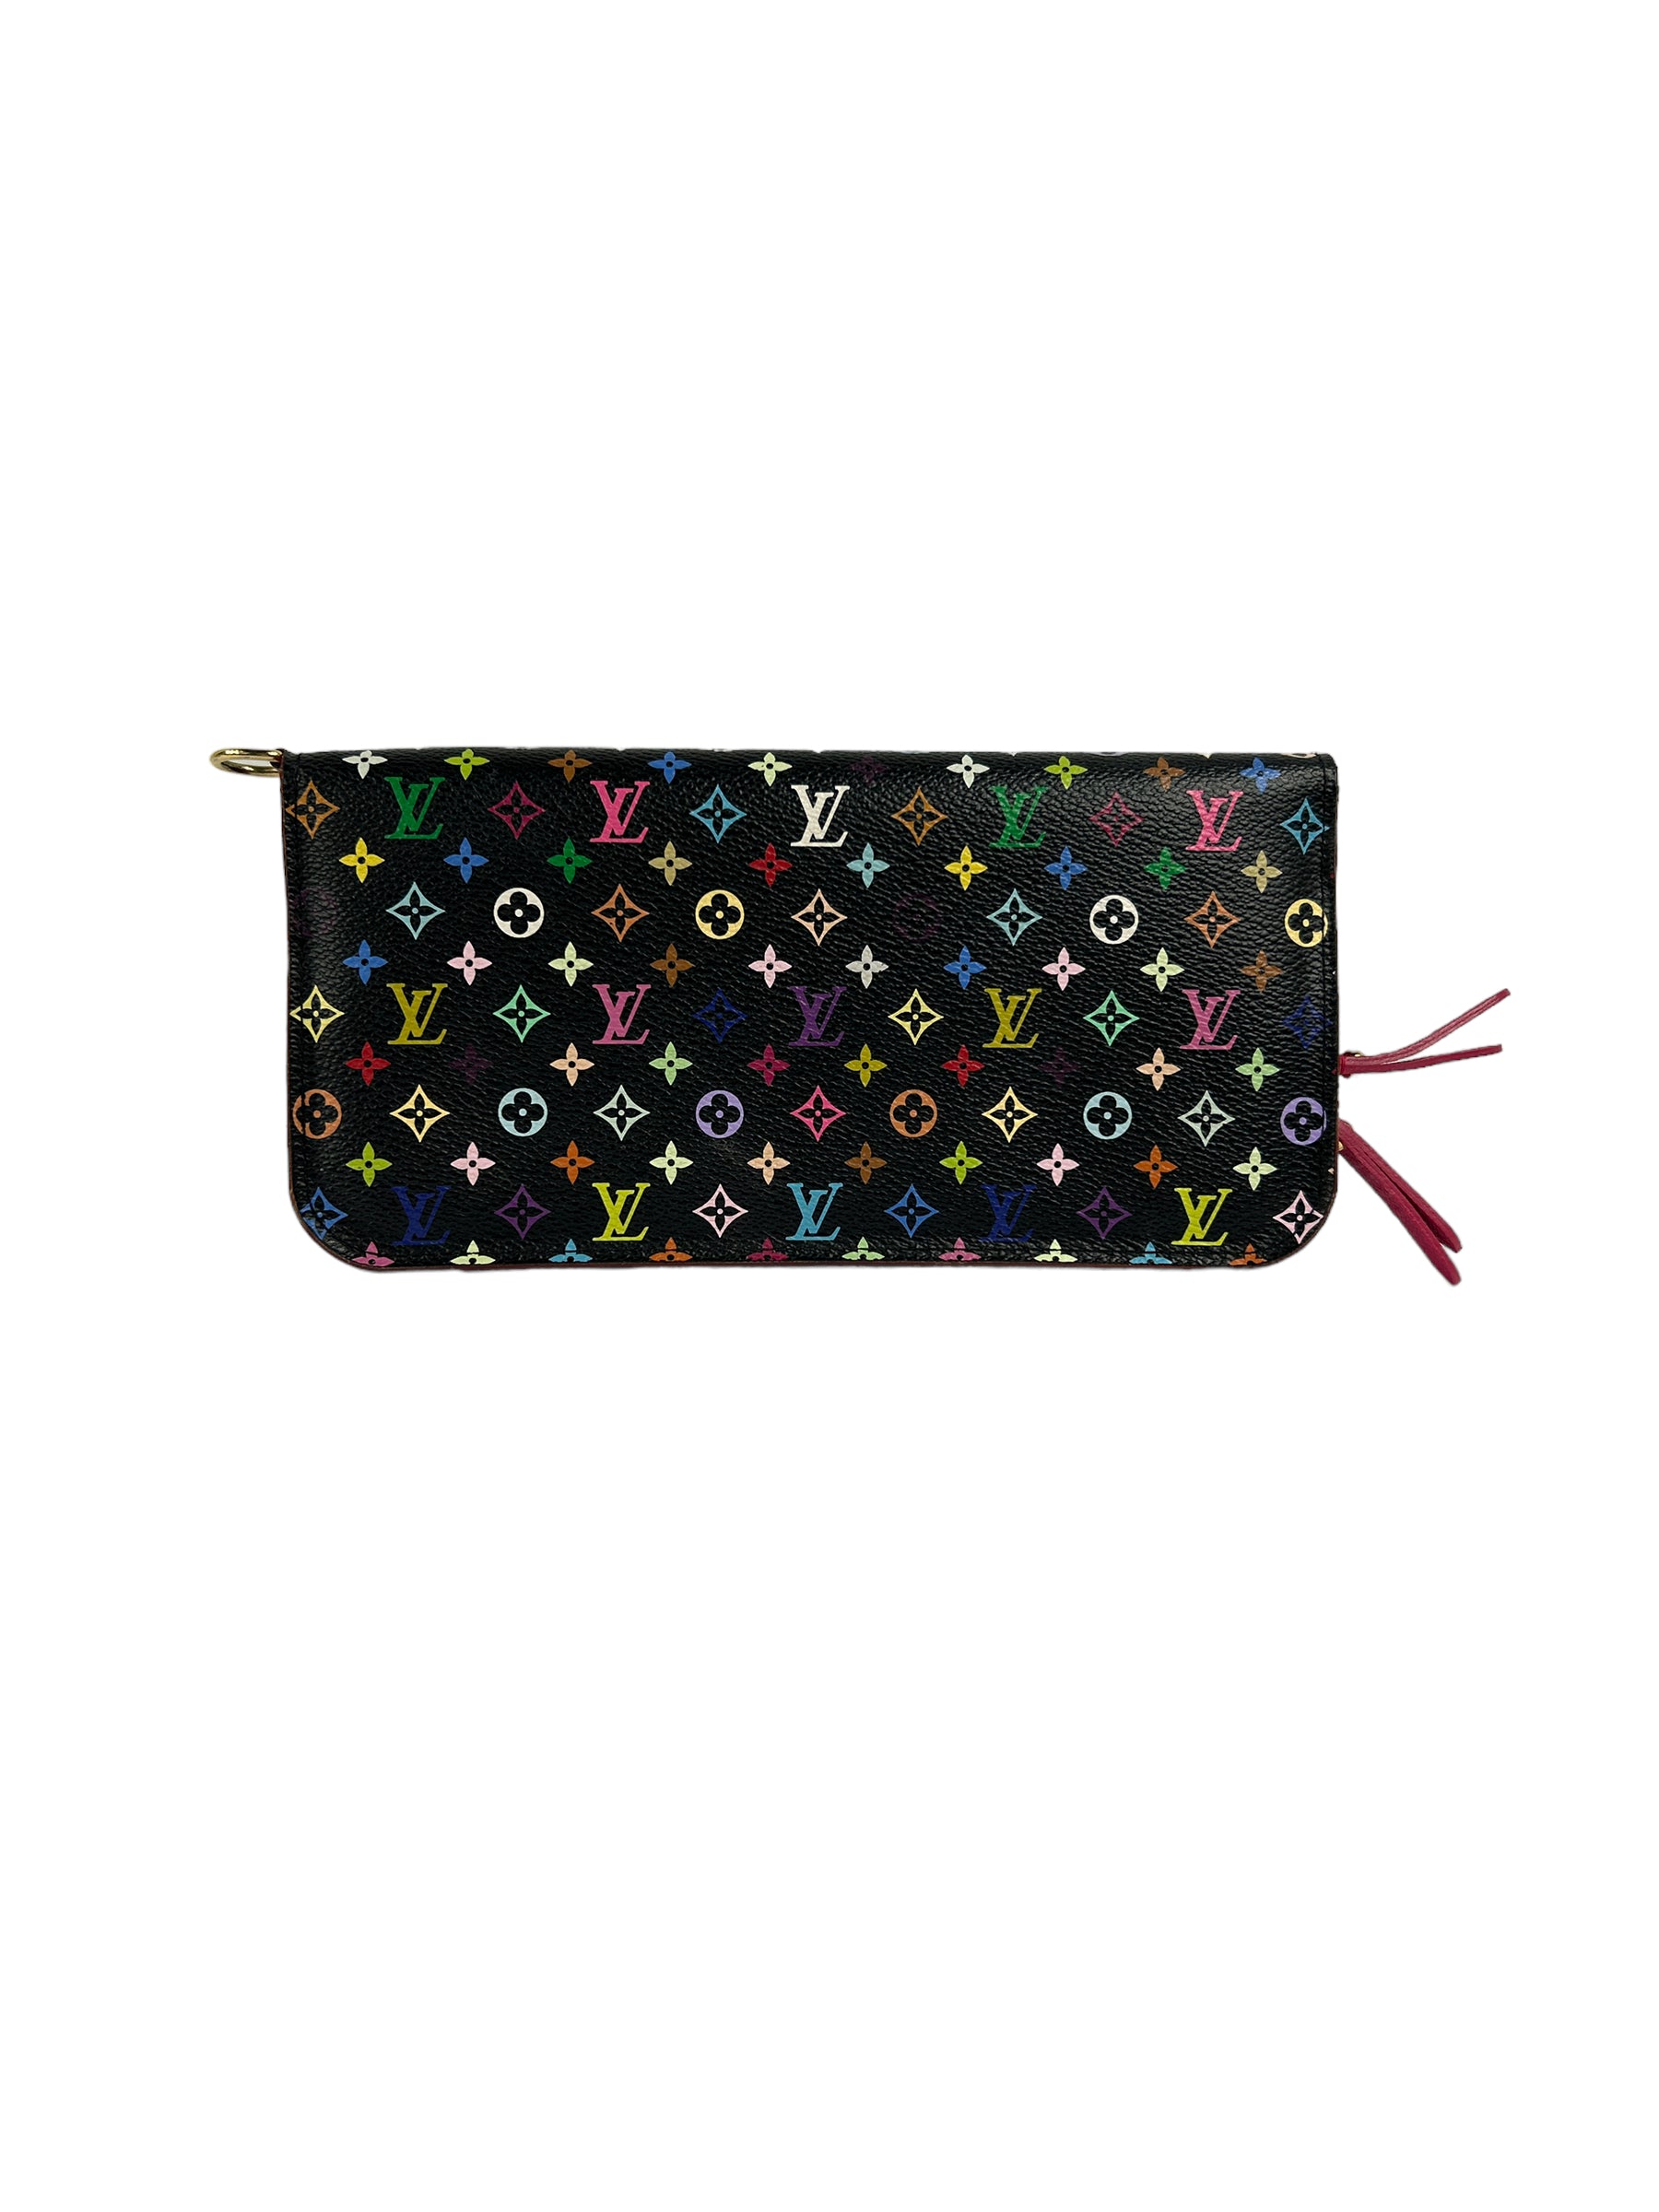 Murakami Multicolored/Black Coated Canvas Insolite Wallet w/GHW